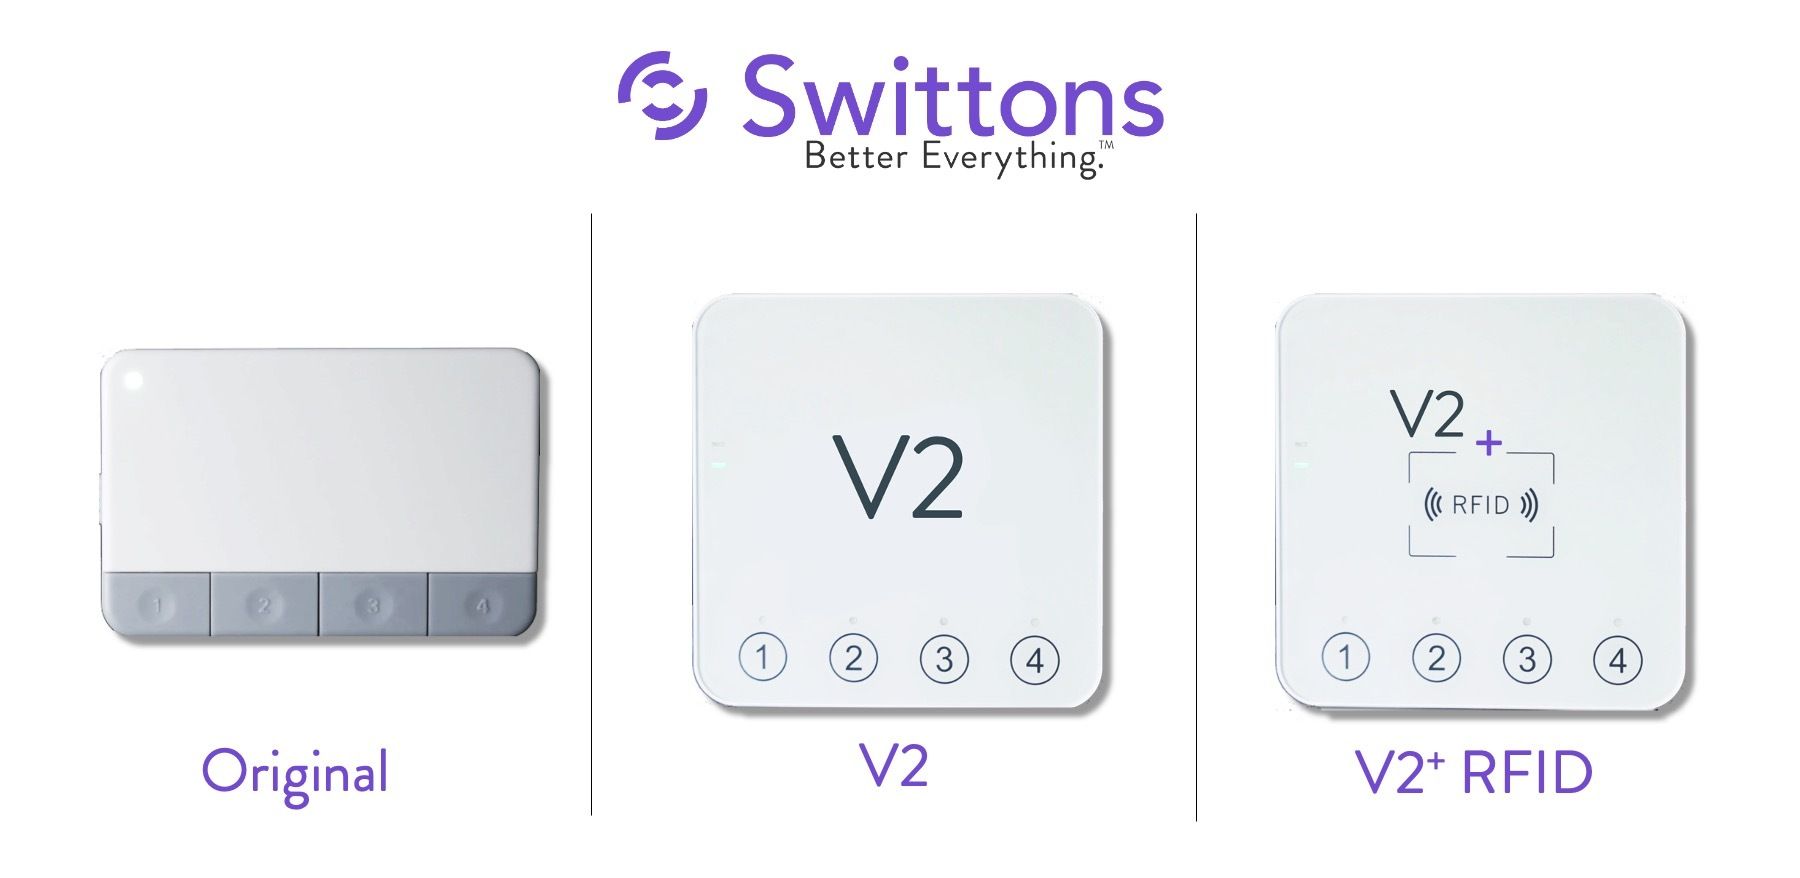 Swittons V2 and V2+ With RFID 